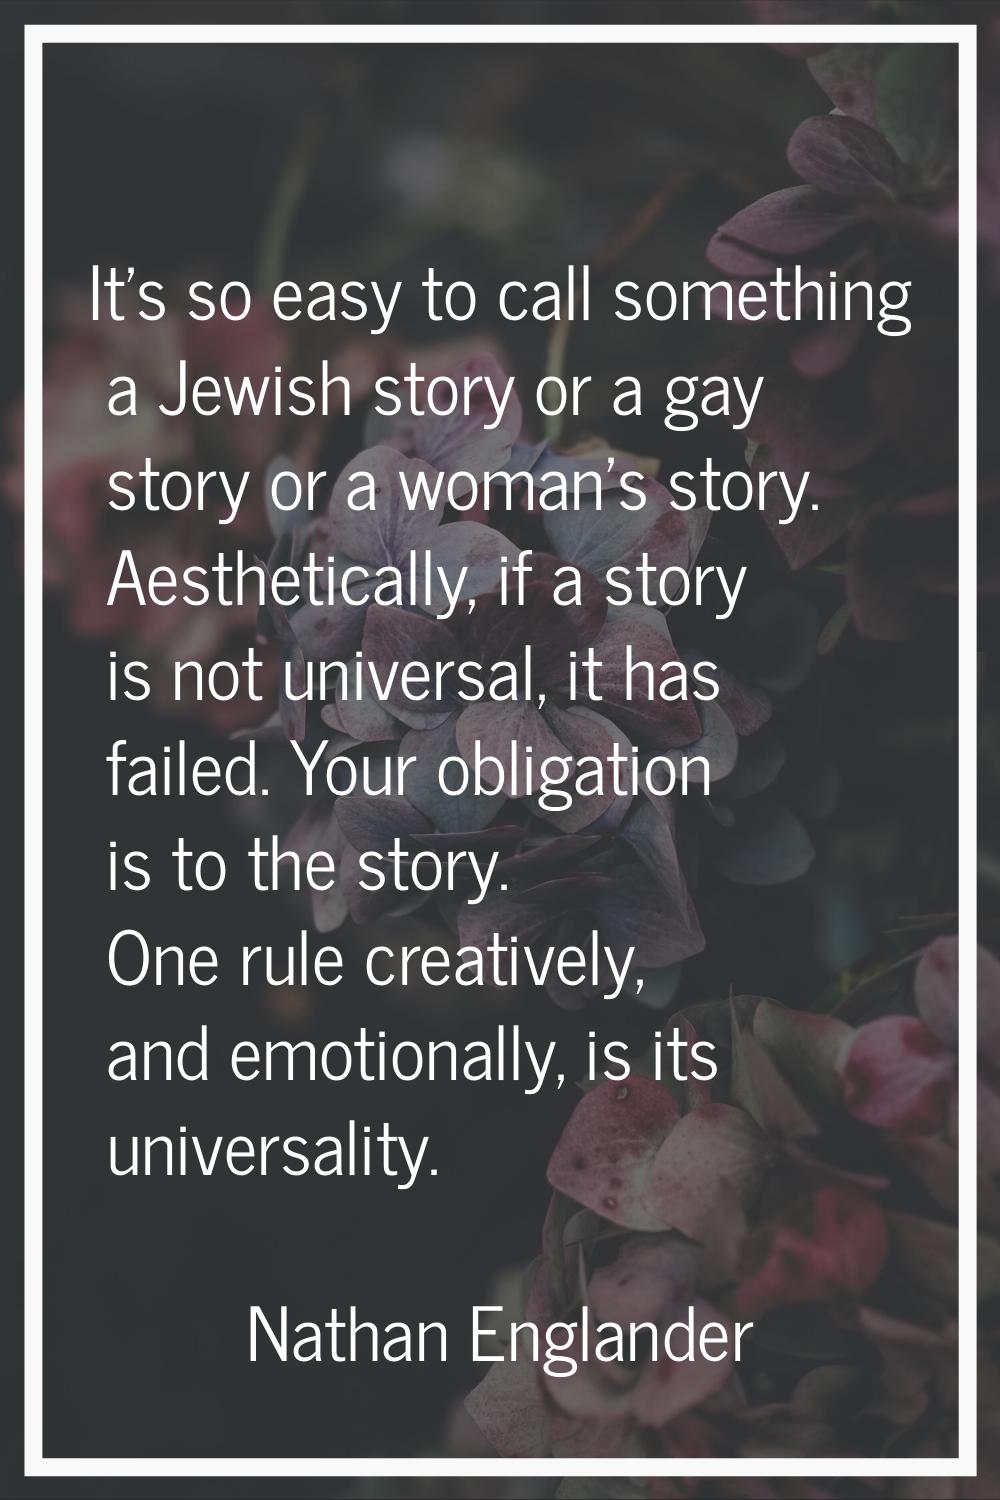 It's so easy to call something a Jewish story or a gay story or a woman's story. Aesthetically, if 